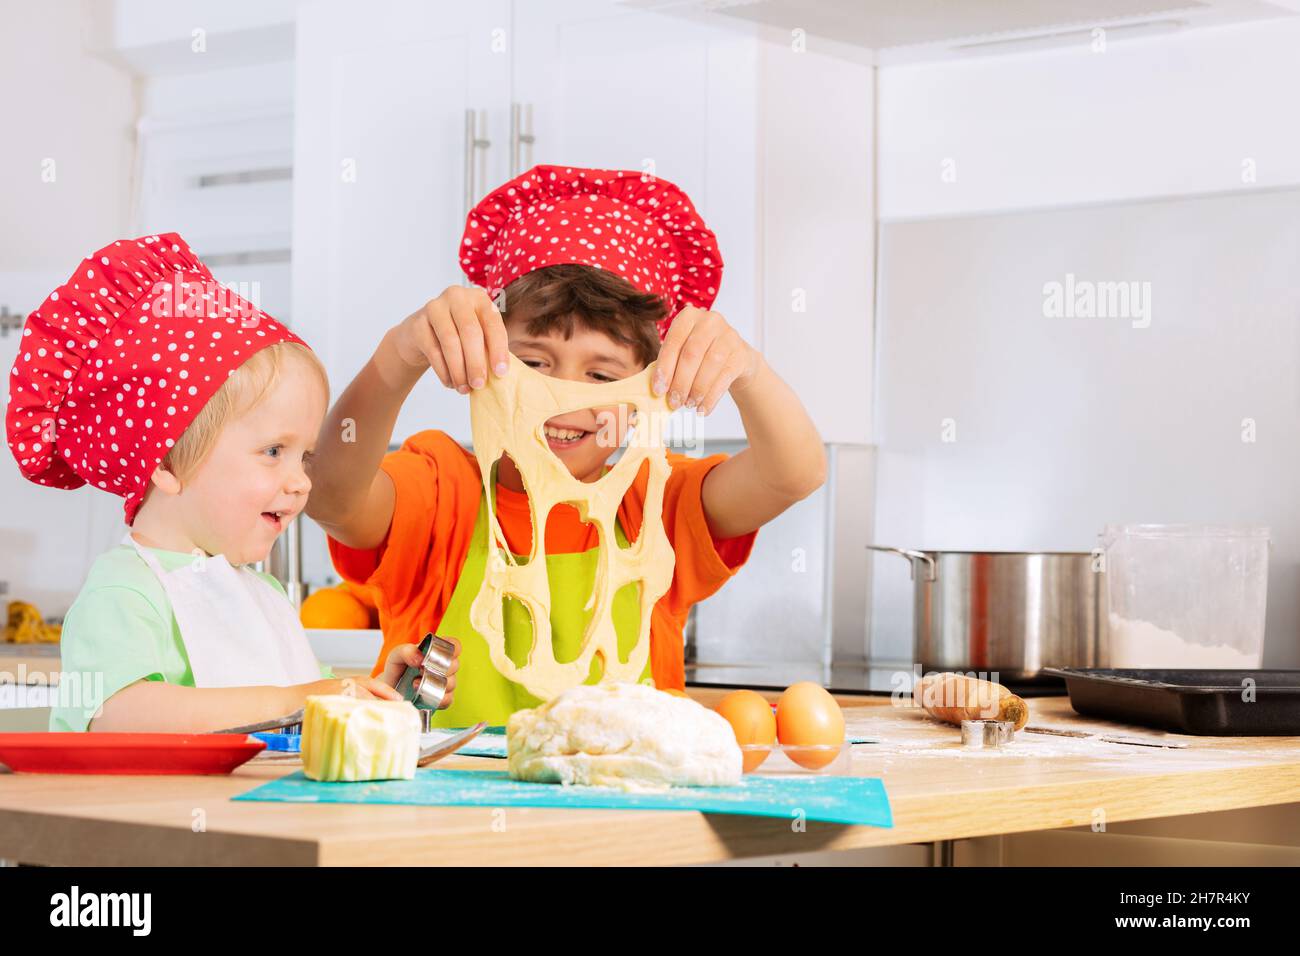 Happy kids play holding dough cutting out cookies Stock Photo